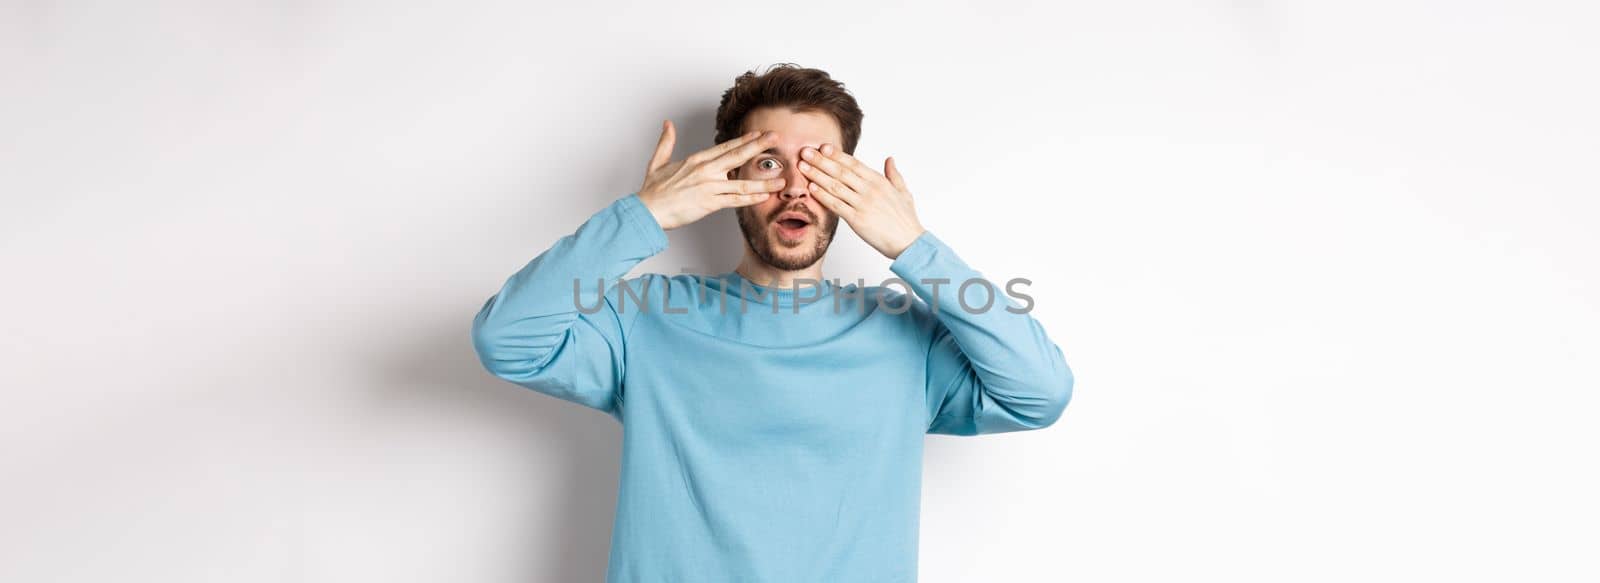 Amazed smiling man covering eyes with hands but peeking through fingers at something awesome, standing over white background.